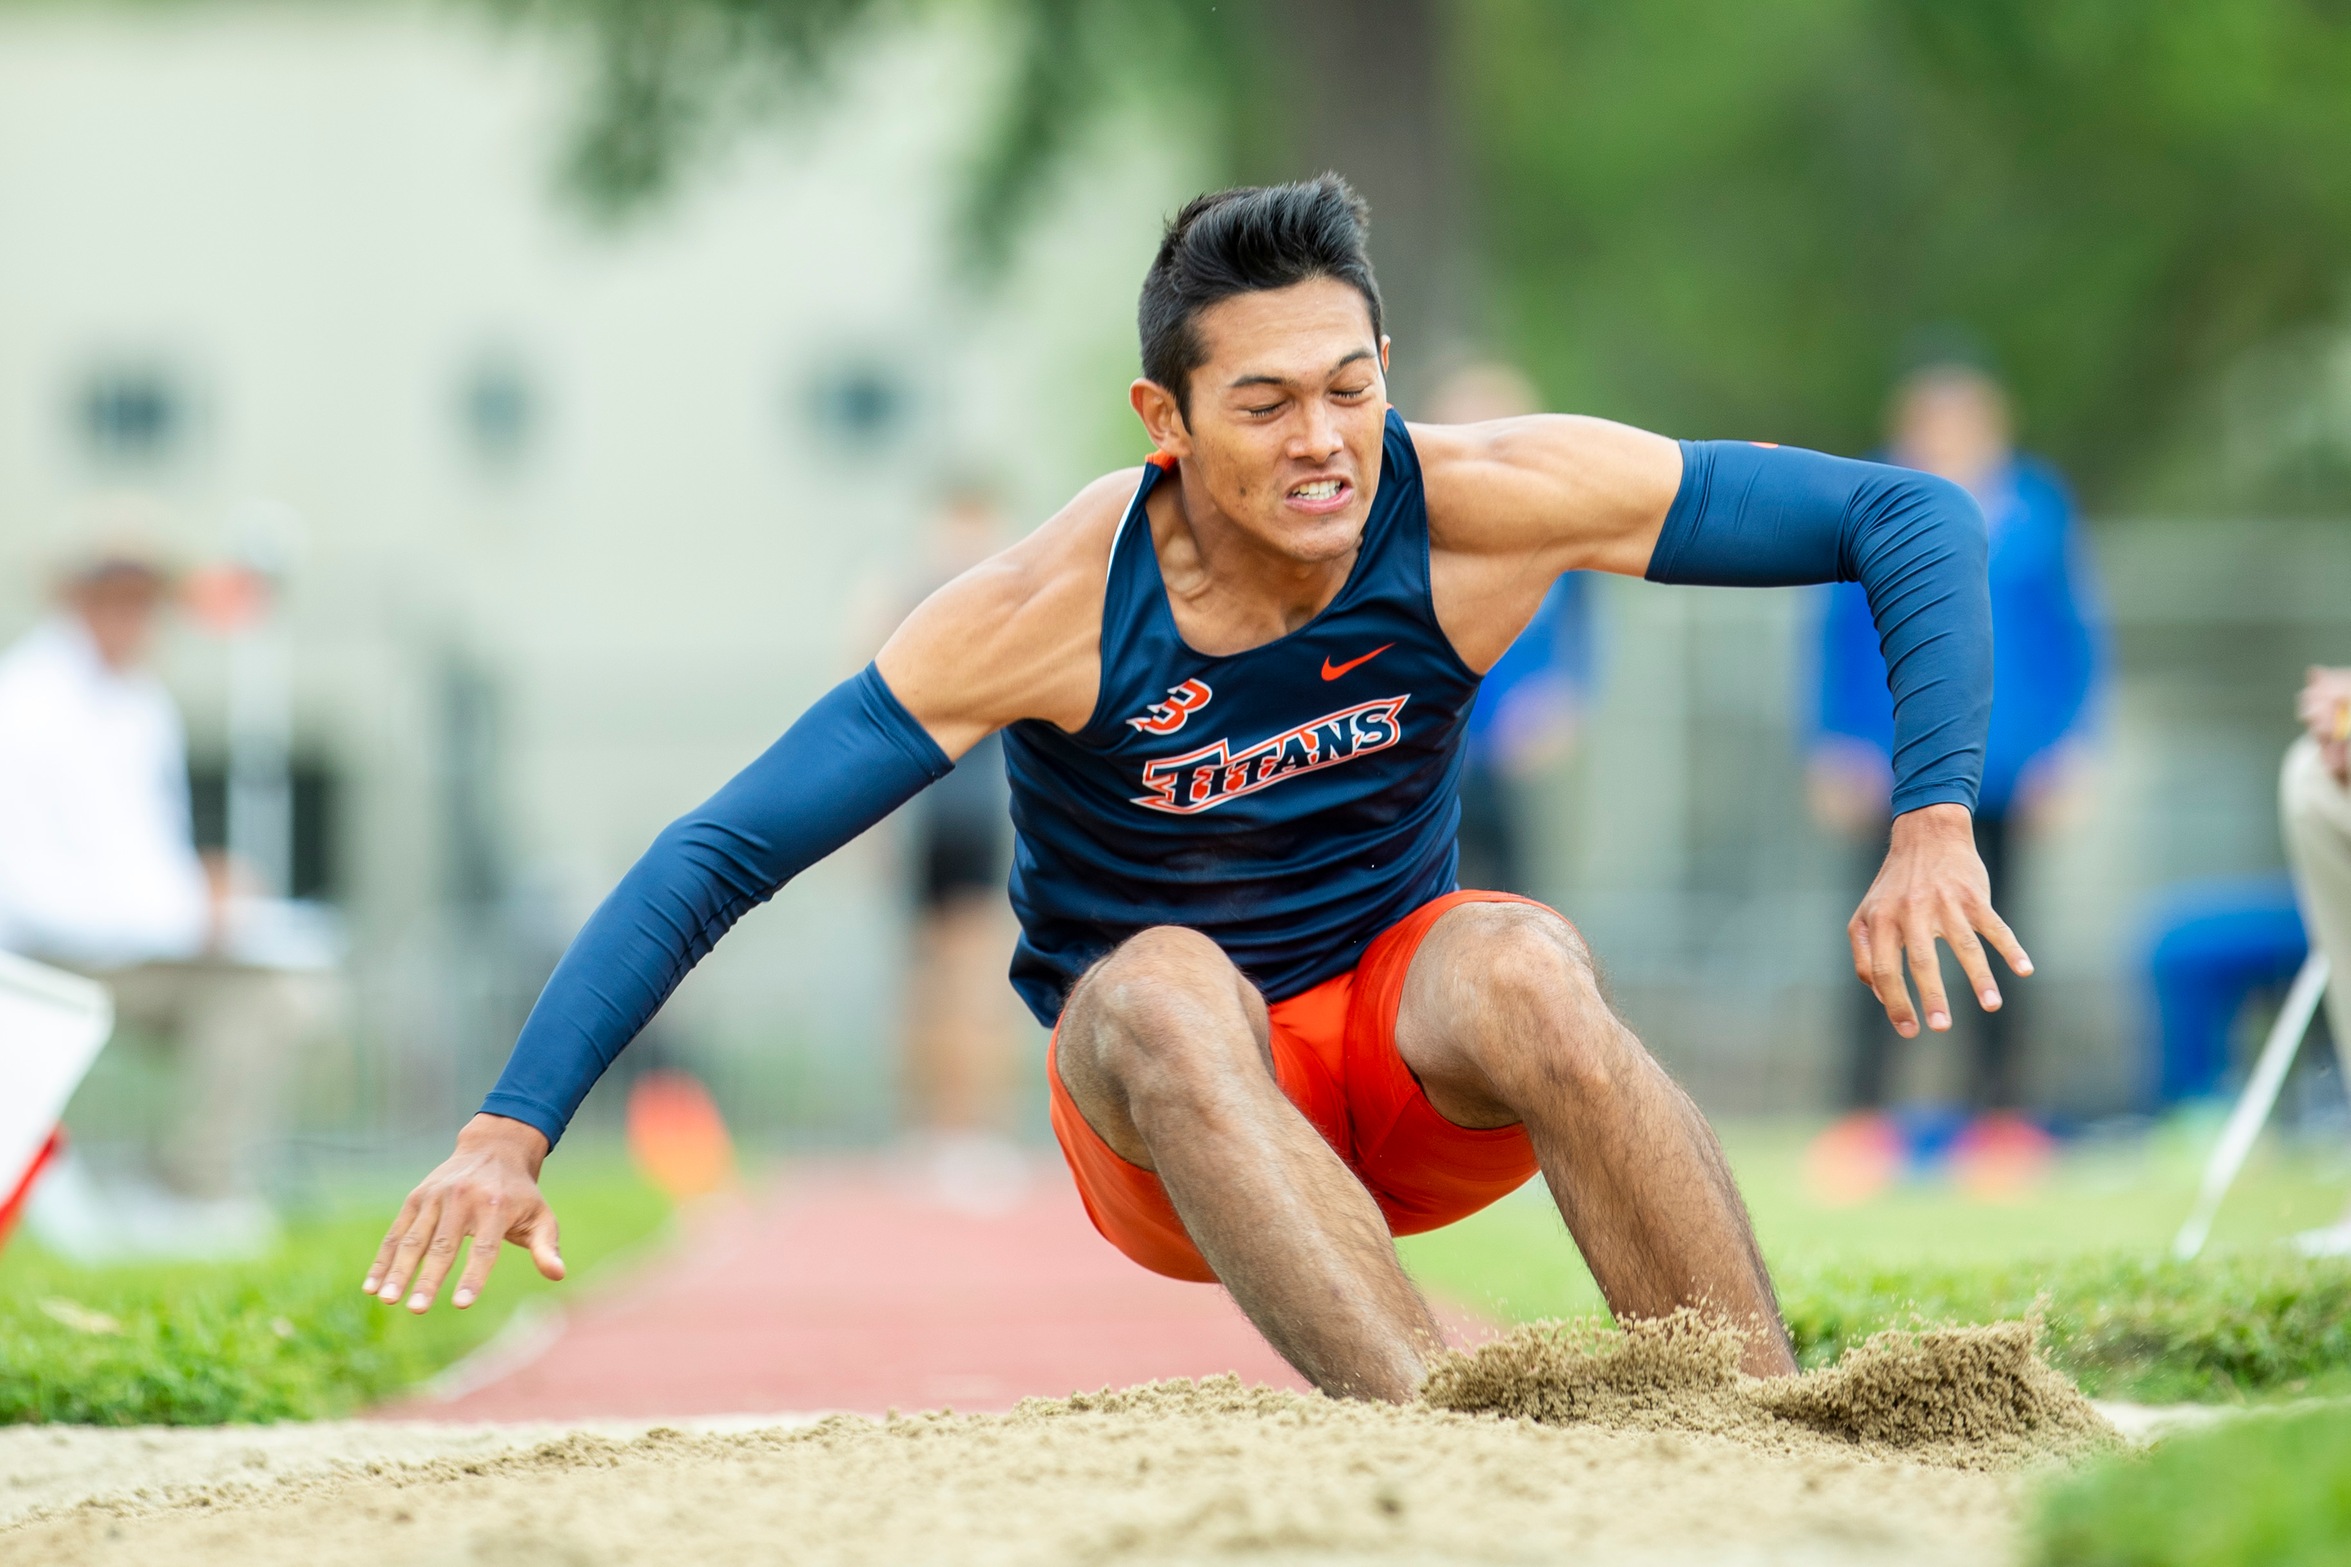 Andrew Aguilar landing in long jump pit